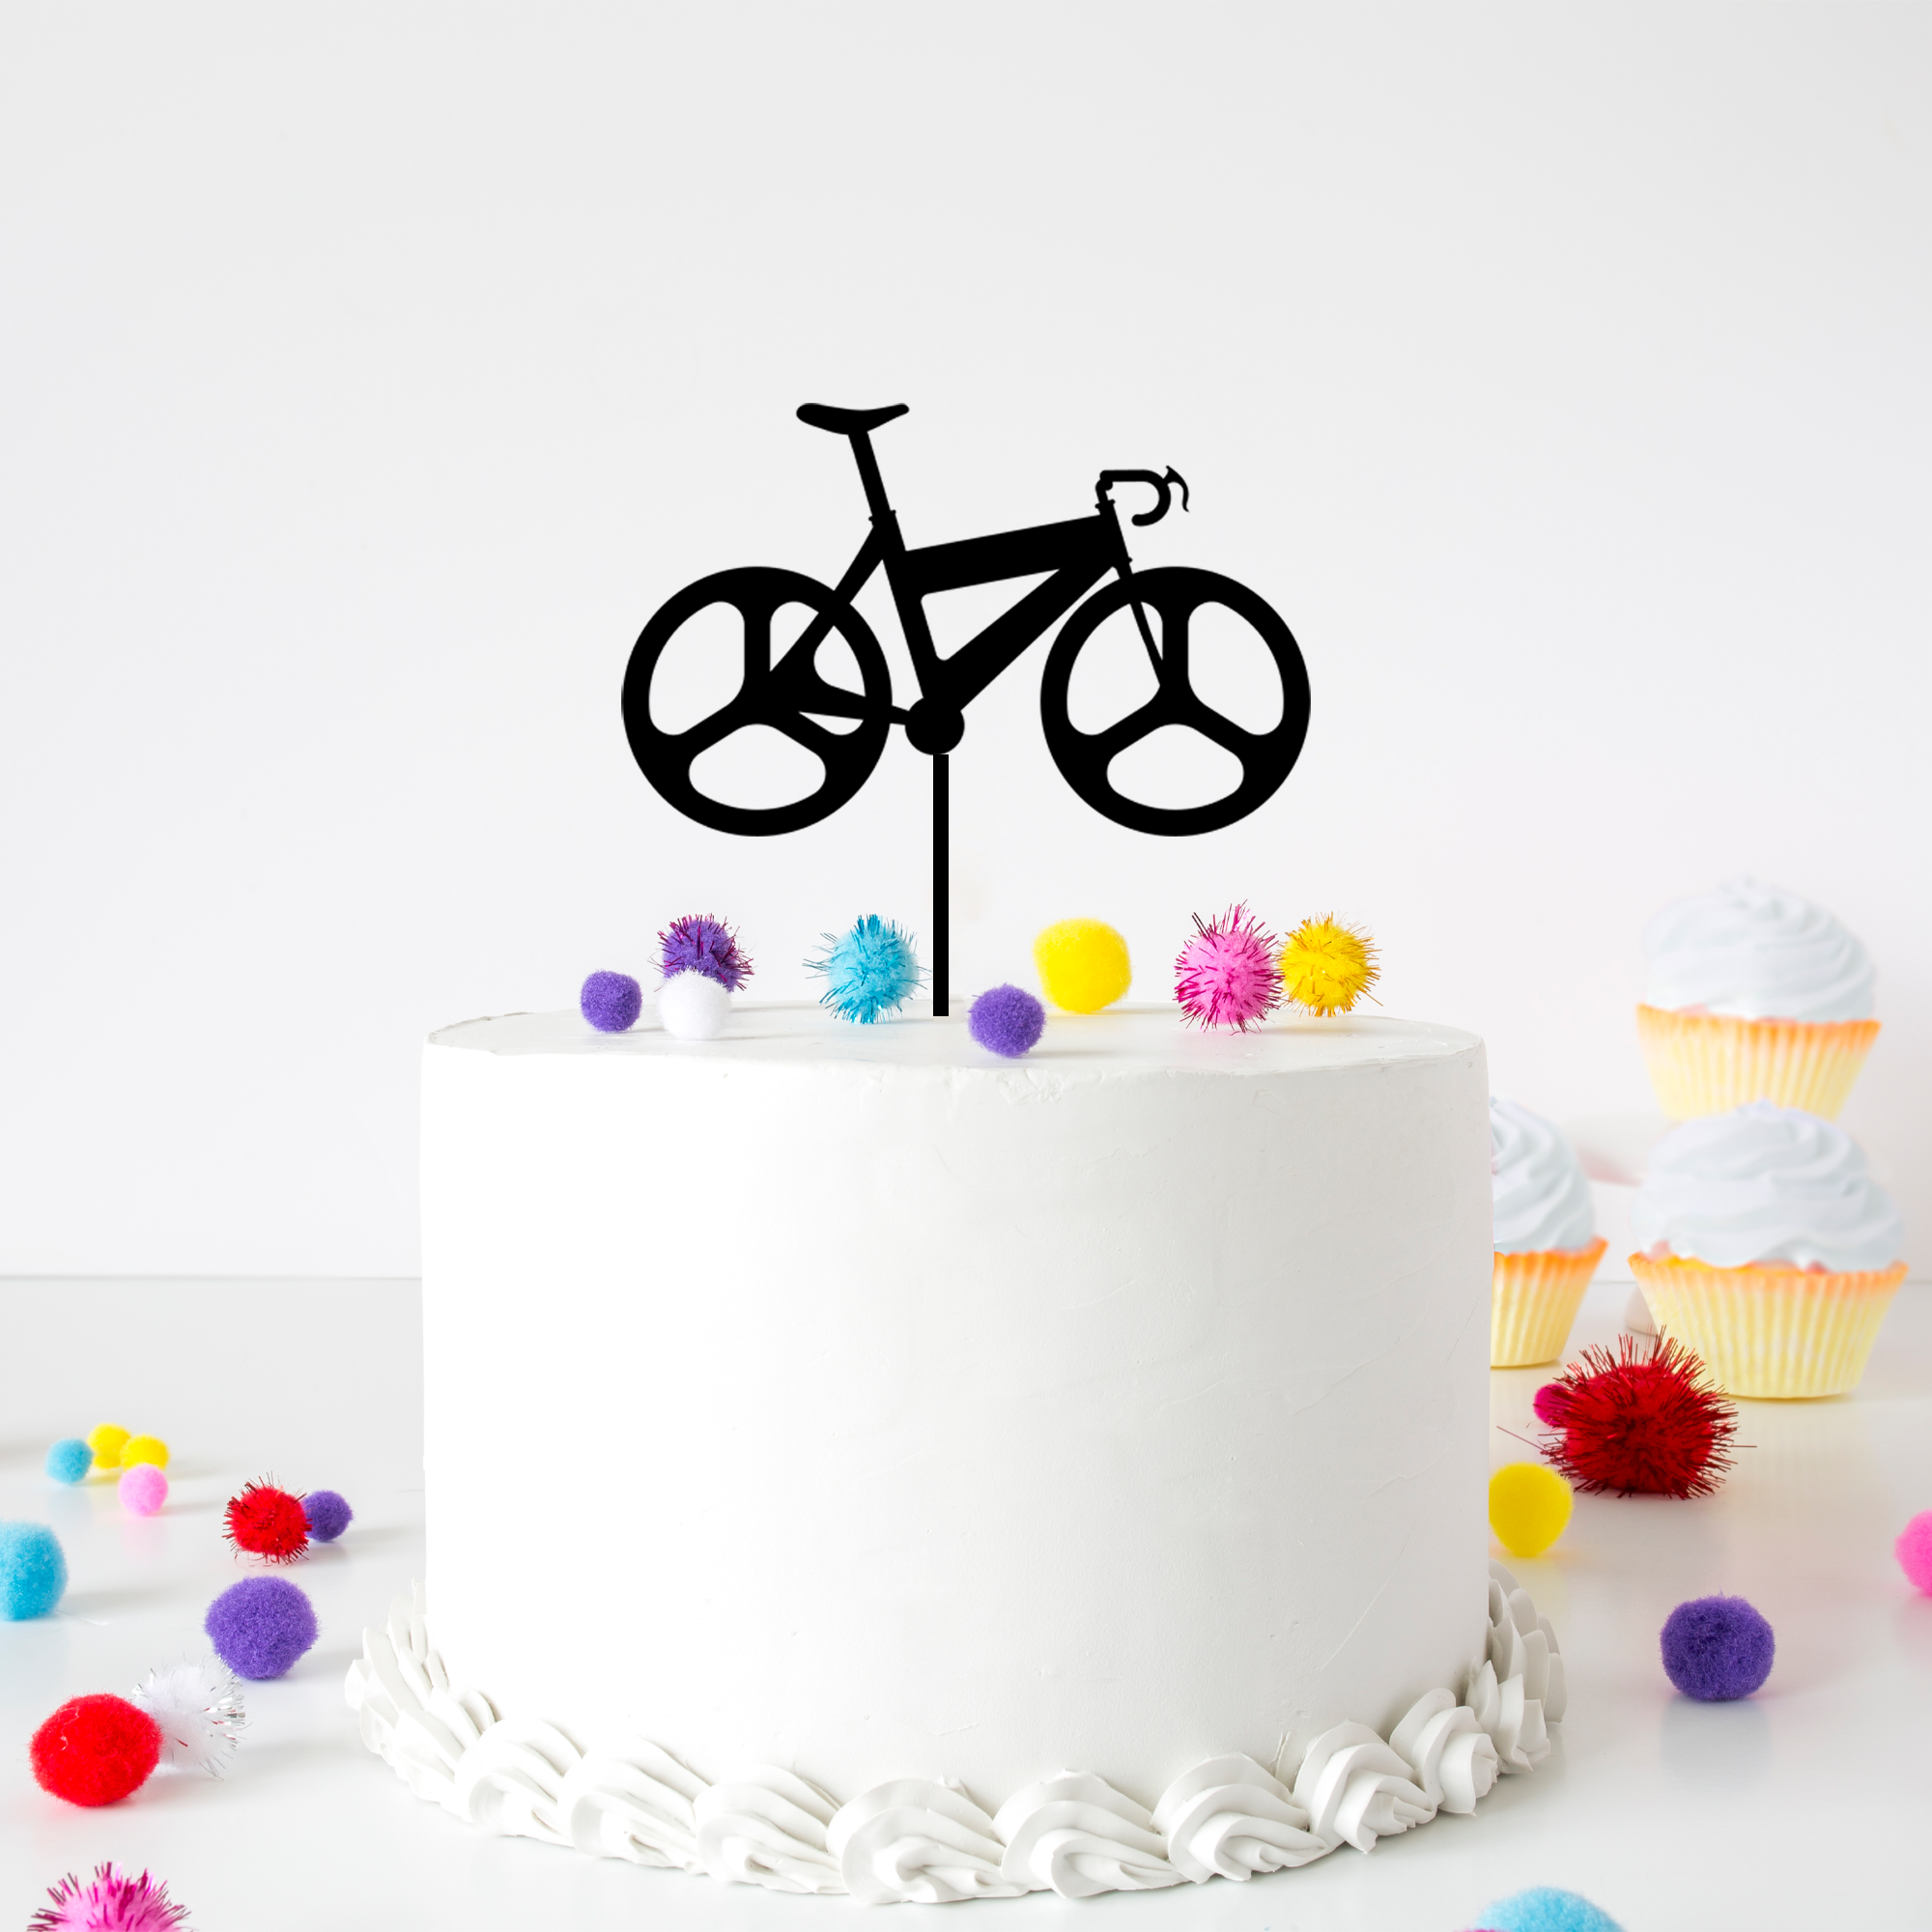 BICYCLE CAKE TOPPER Personalised Cyclist Bike Birthday Cake Topper Any Name  Age £3.29 - PicClick UK